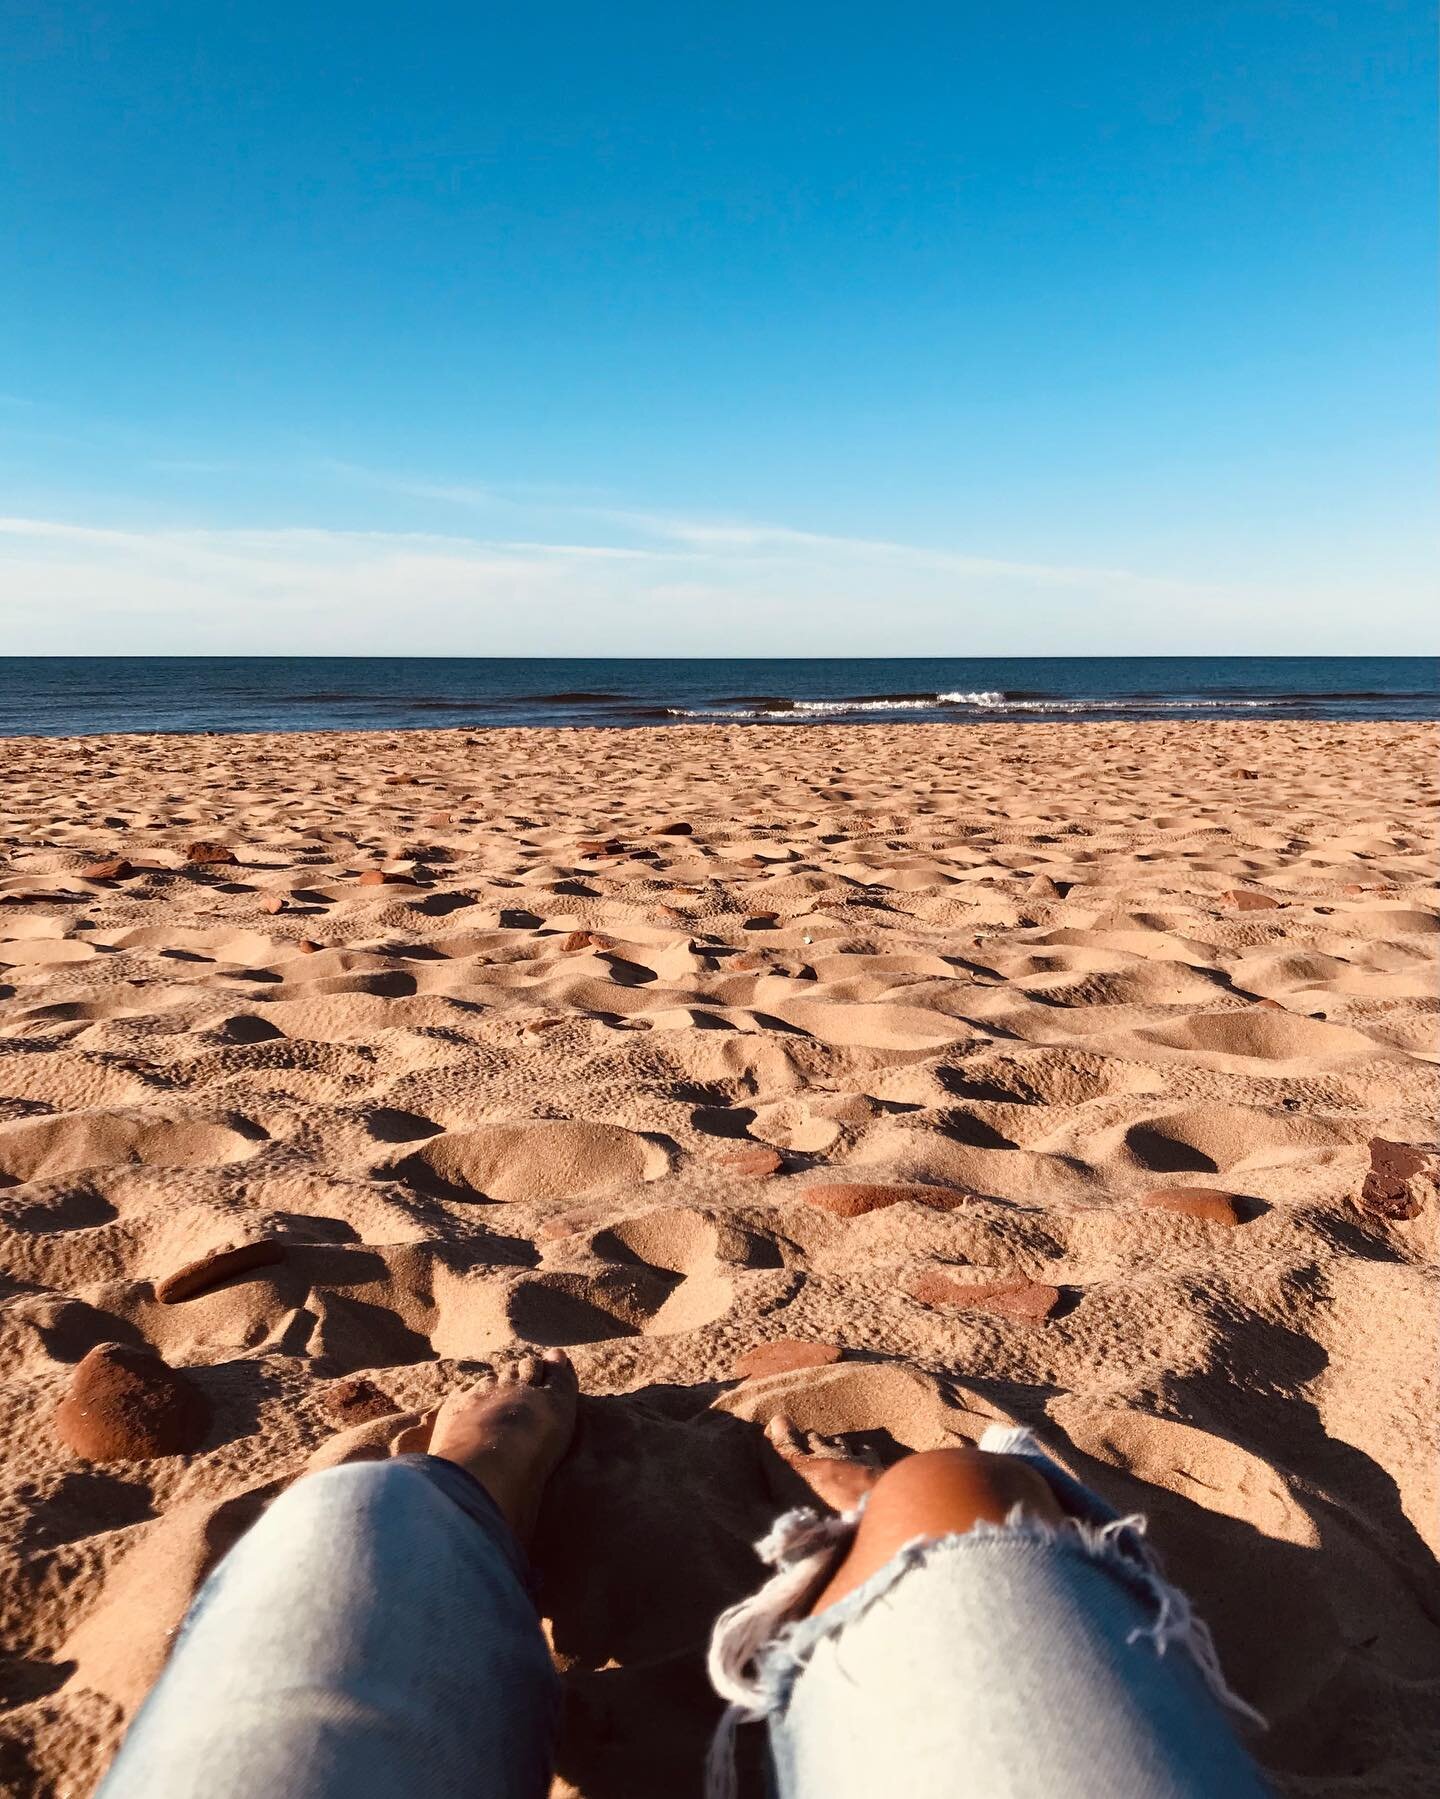 Pink crush // I&rsquo;m not a pink or red person but I am obsessed with the earthy beauty of PEI sand. For someone who lives among the silver white sand beaches of NS&rsquo;s South Shore this is an inviting change of palette. I can never get enough o